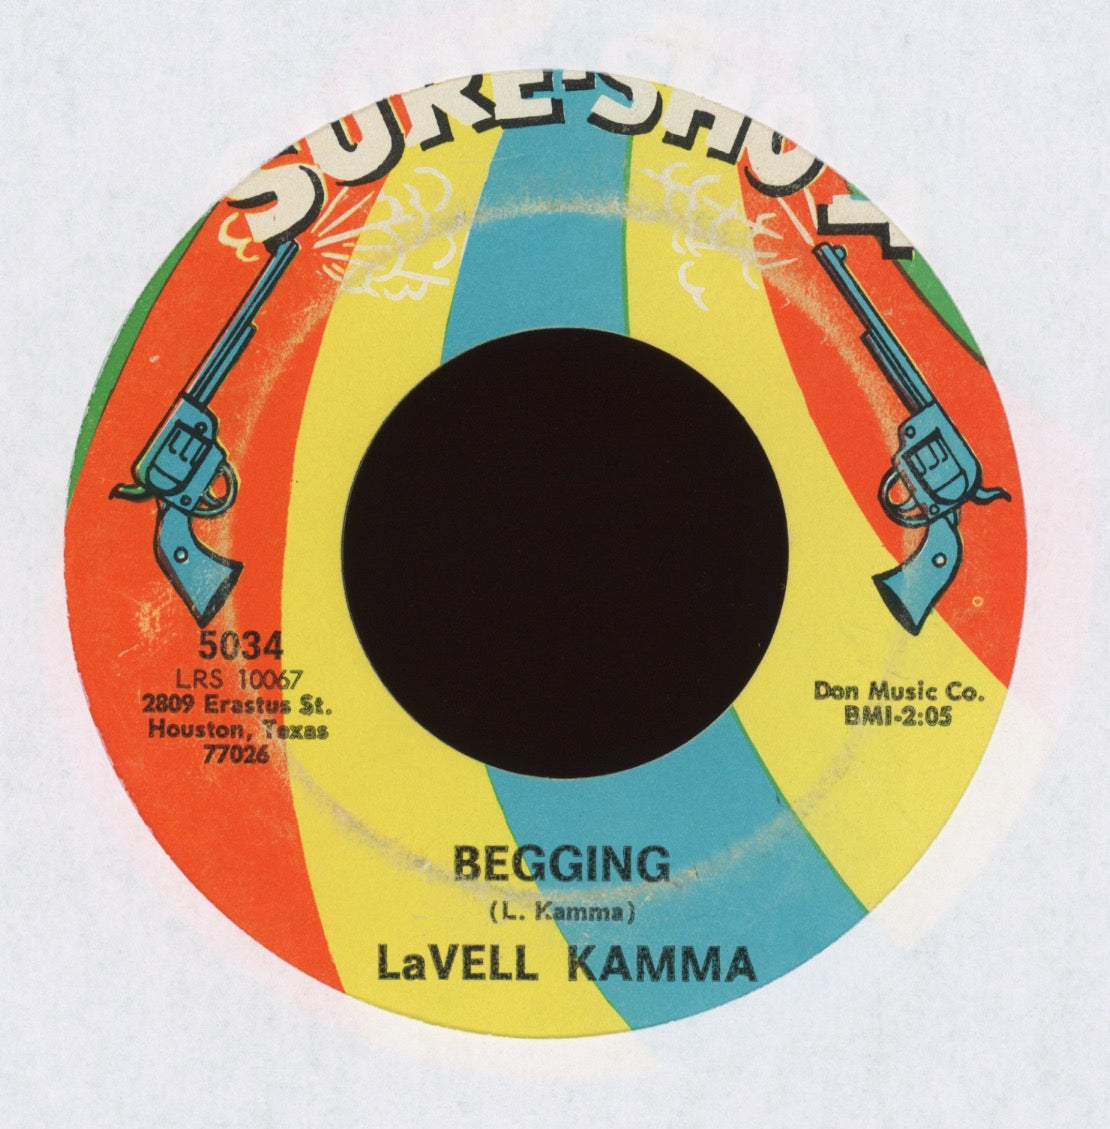 Lavell Kamma - Try To Keep Yourself Up Tight on Sure Shot